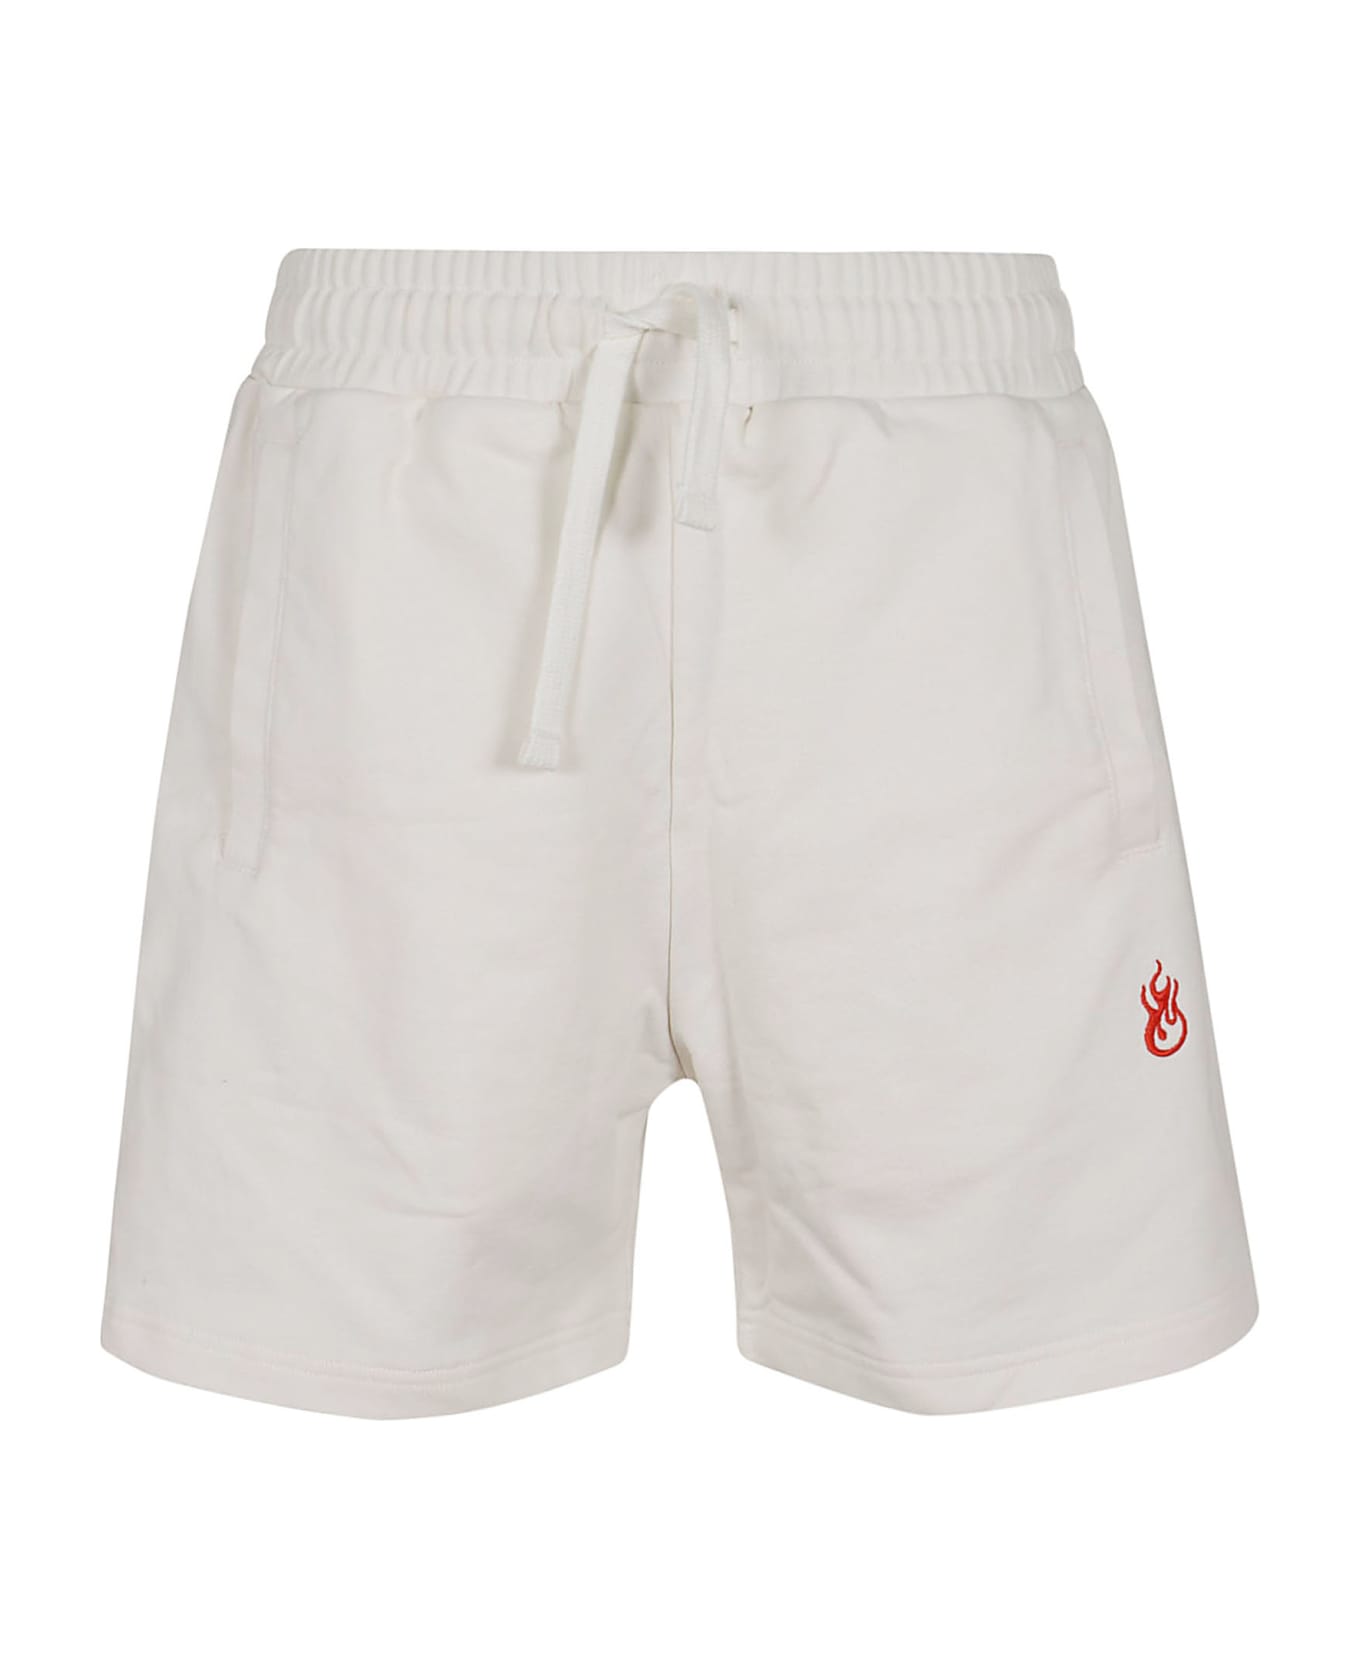 Vision of Super White Shorts With Flames Logo And Metal Label - White ショートパンツ